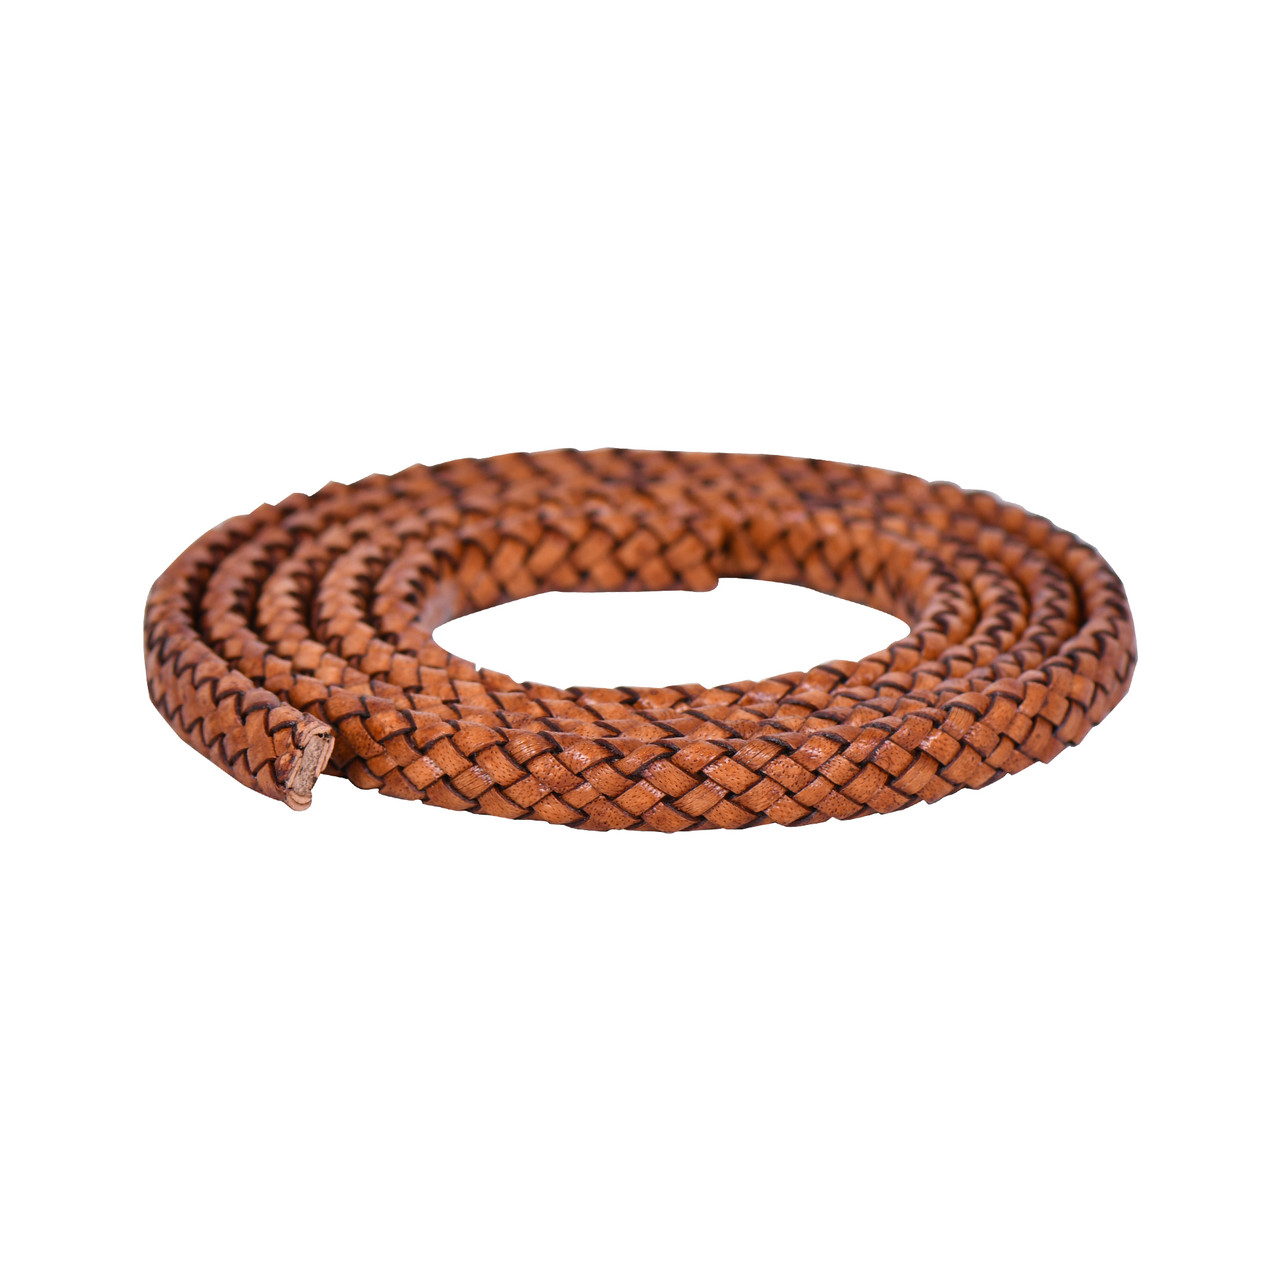 Xsotica Gypsy Kinte Flat Braided Bracelet Leather Cord 10 mm 1 Meter